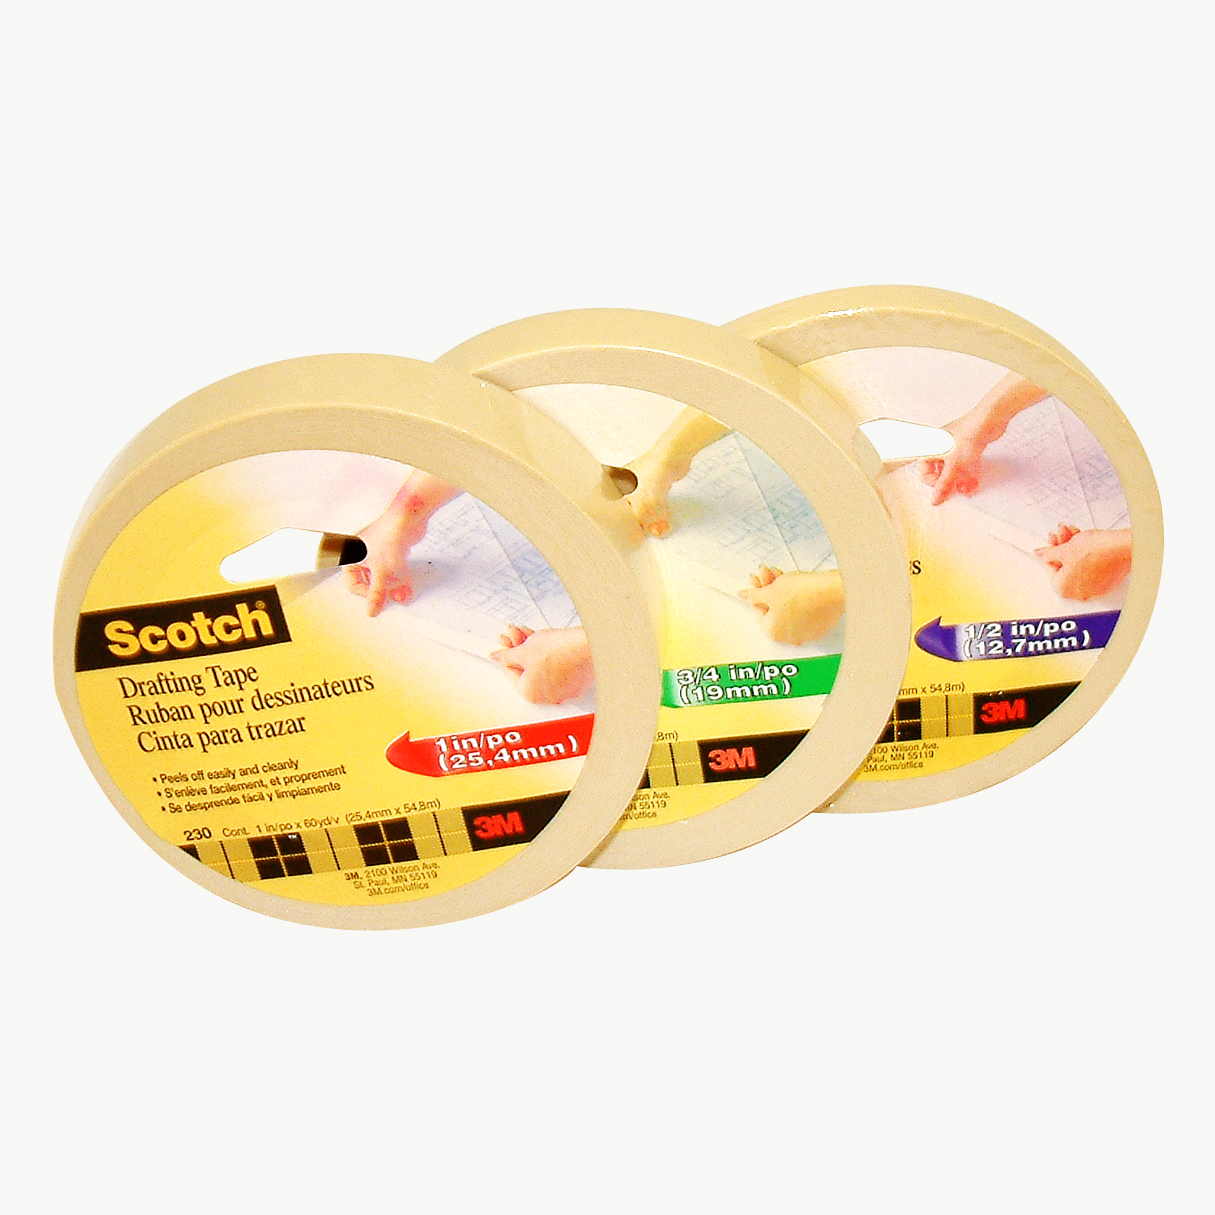 Scotch Drafting Tape [Discontinued] (230)